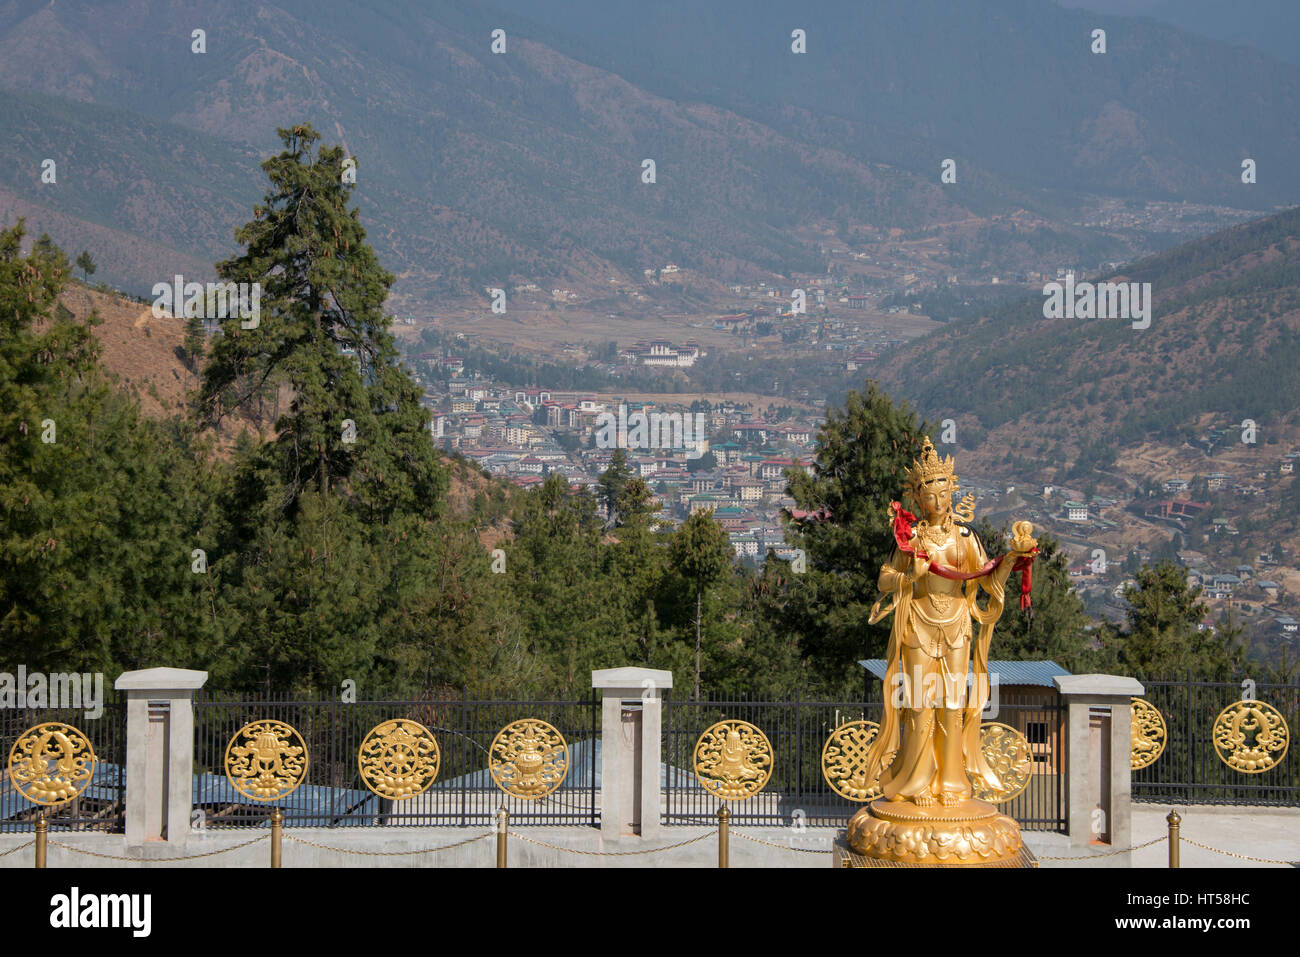 Bhutan, Thimphu. Buddha Dordenma statue. Golden statues around one of the largest Buddha statues in the world with a view of Kuenselphodrang Nature Pa Stock Photo